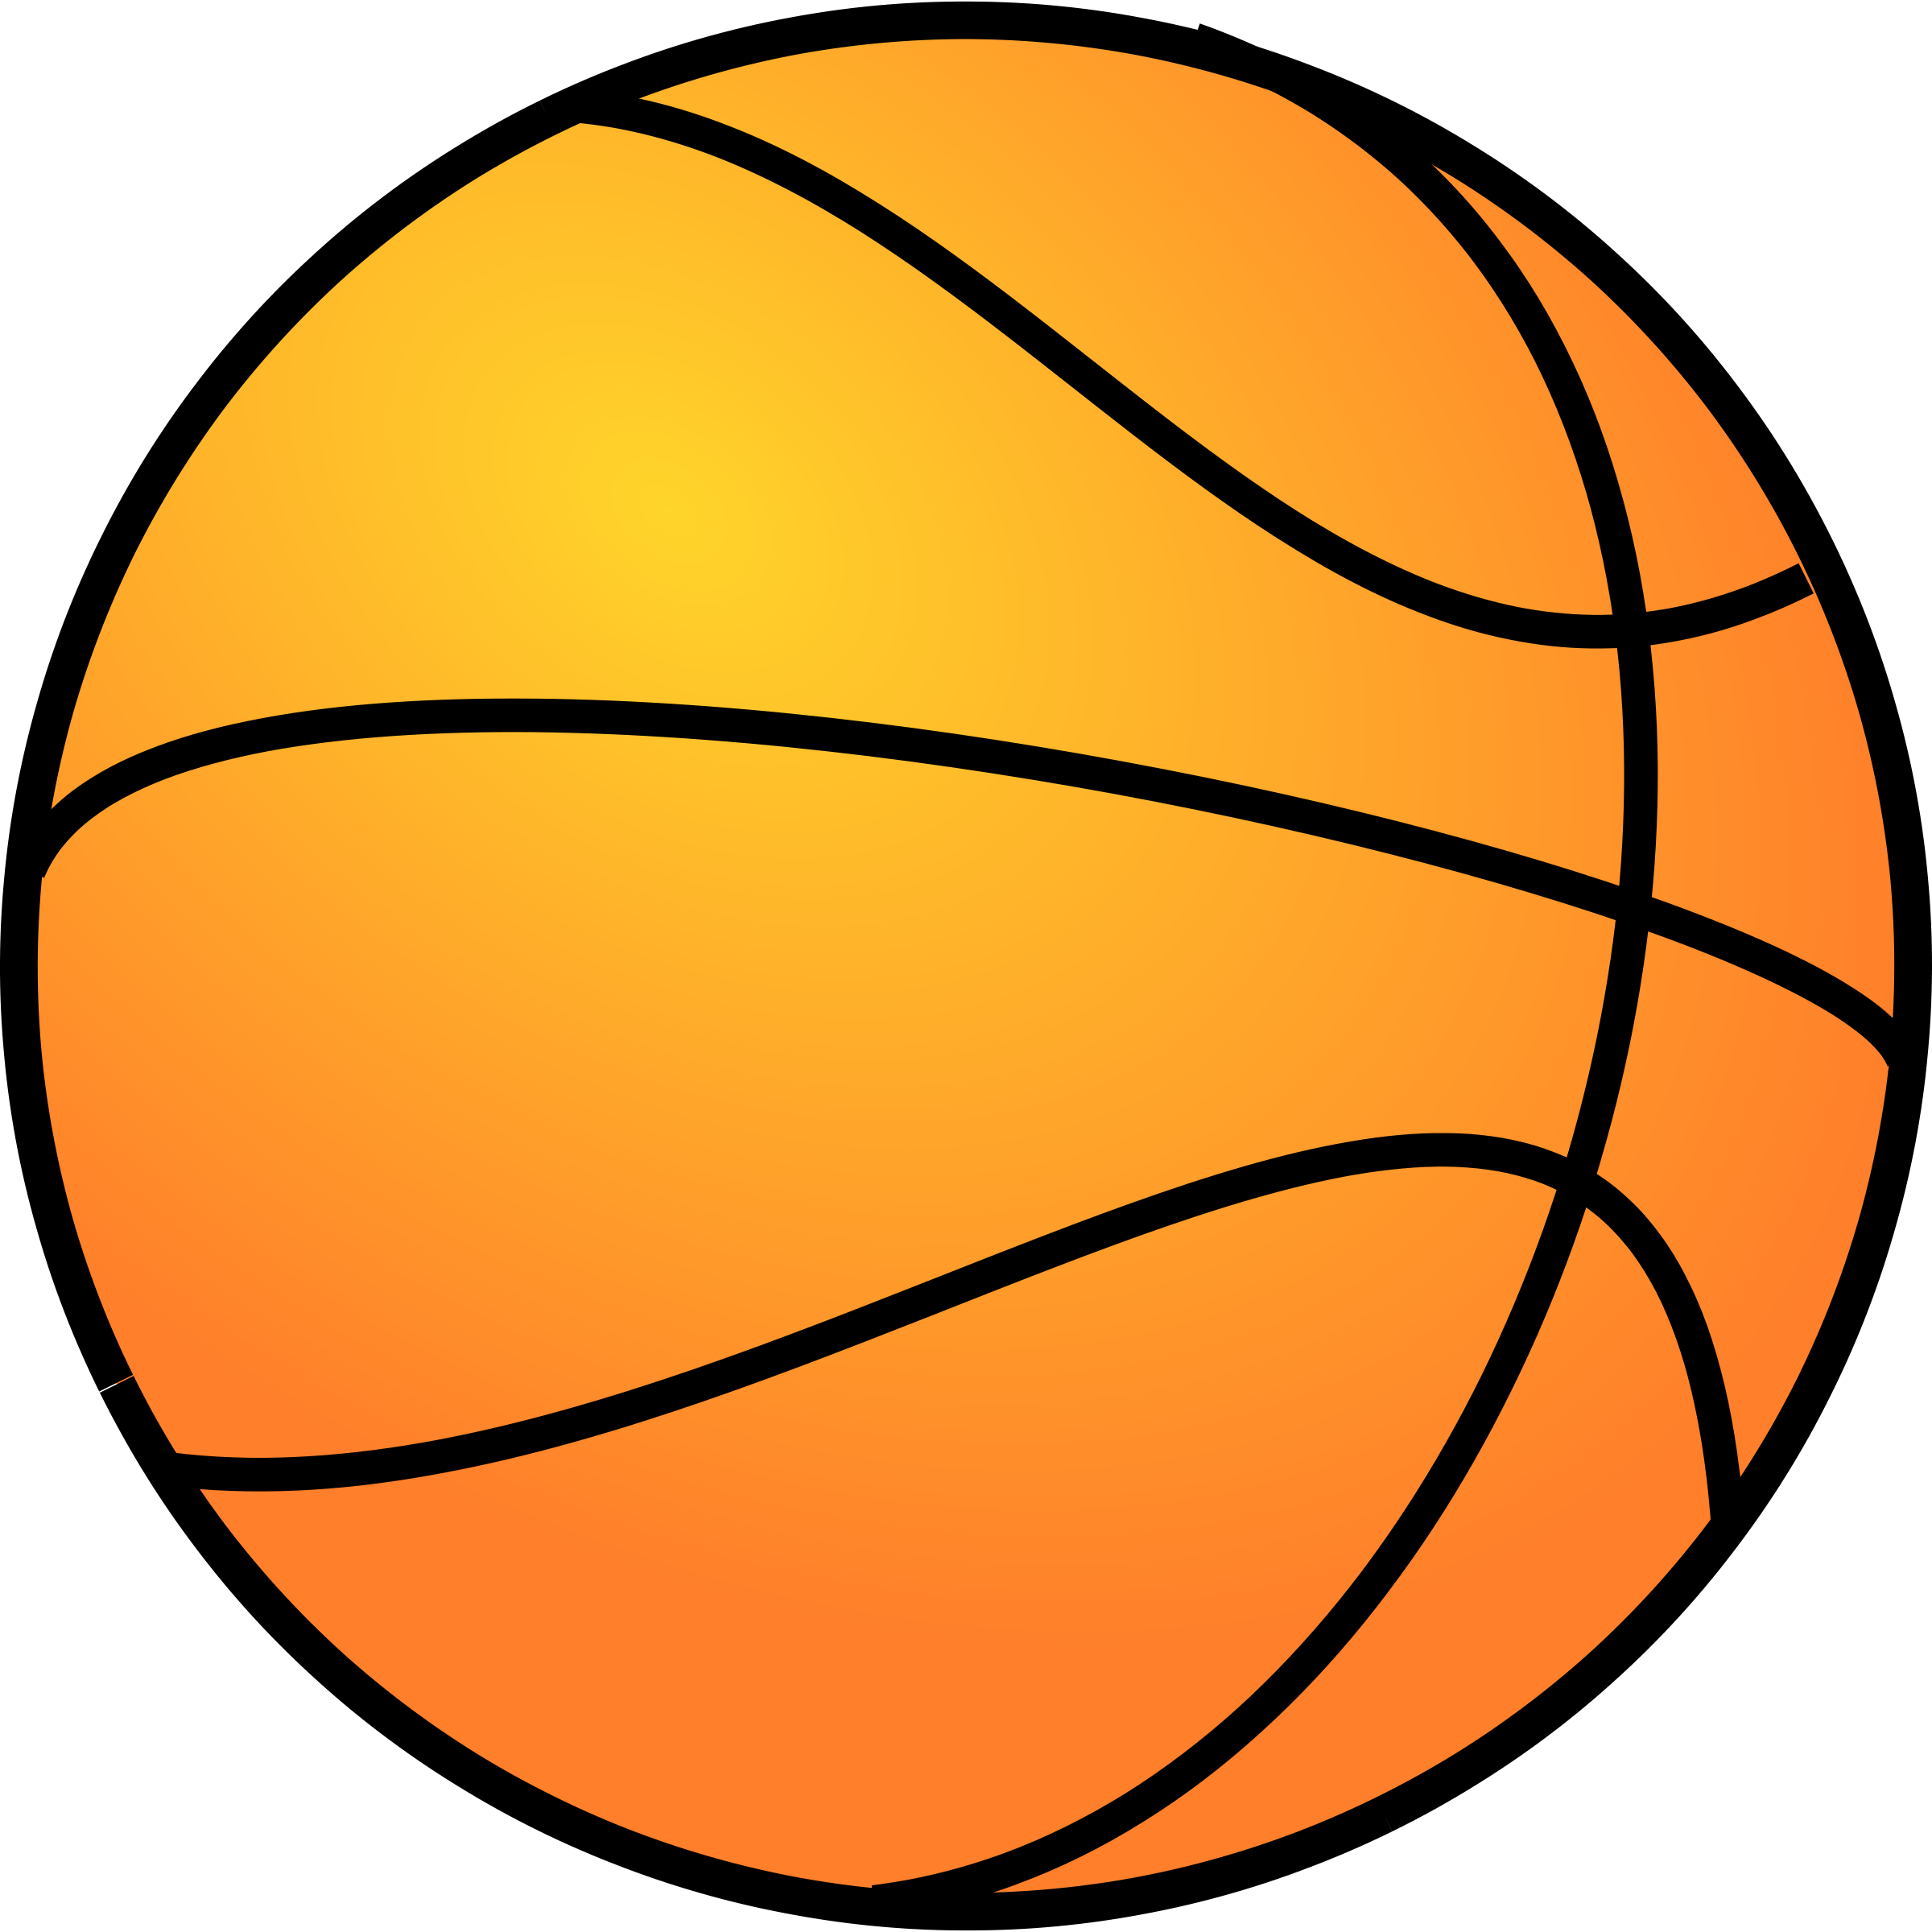 Basketball Clipart Free